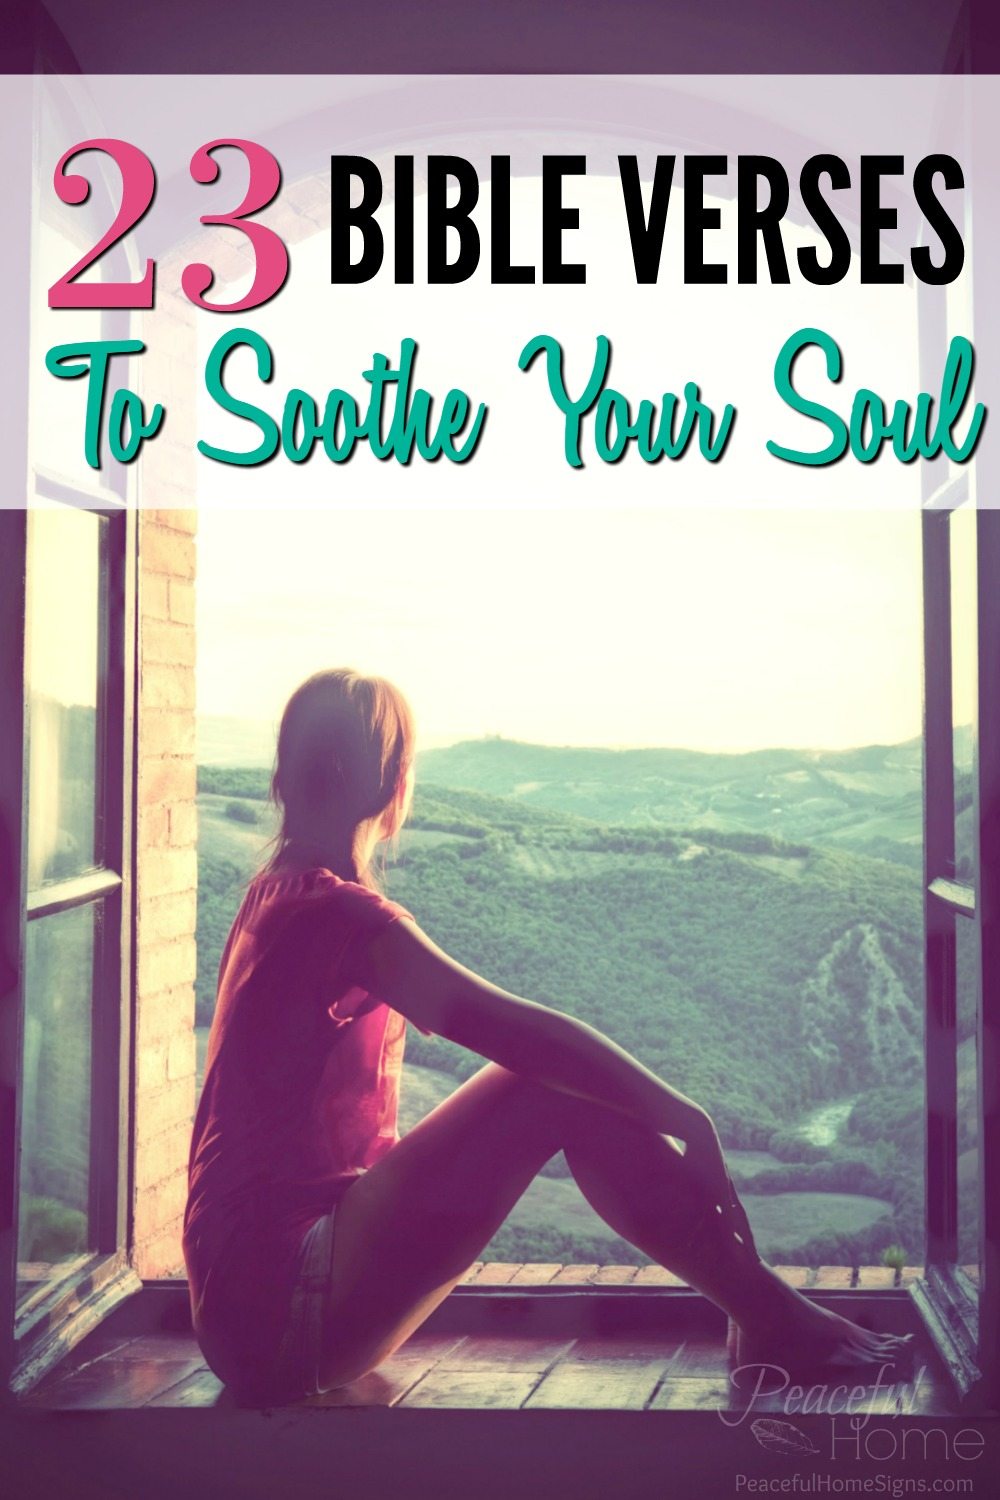 23 Bible Verses to Soothe Your Soul | Scriptures for Stress | Bible Verses for worry, tension, heaviness, burden | God's answers | Scripture lists